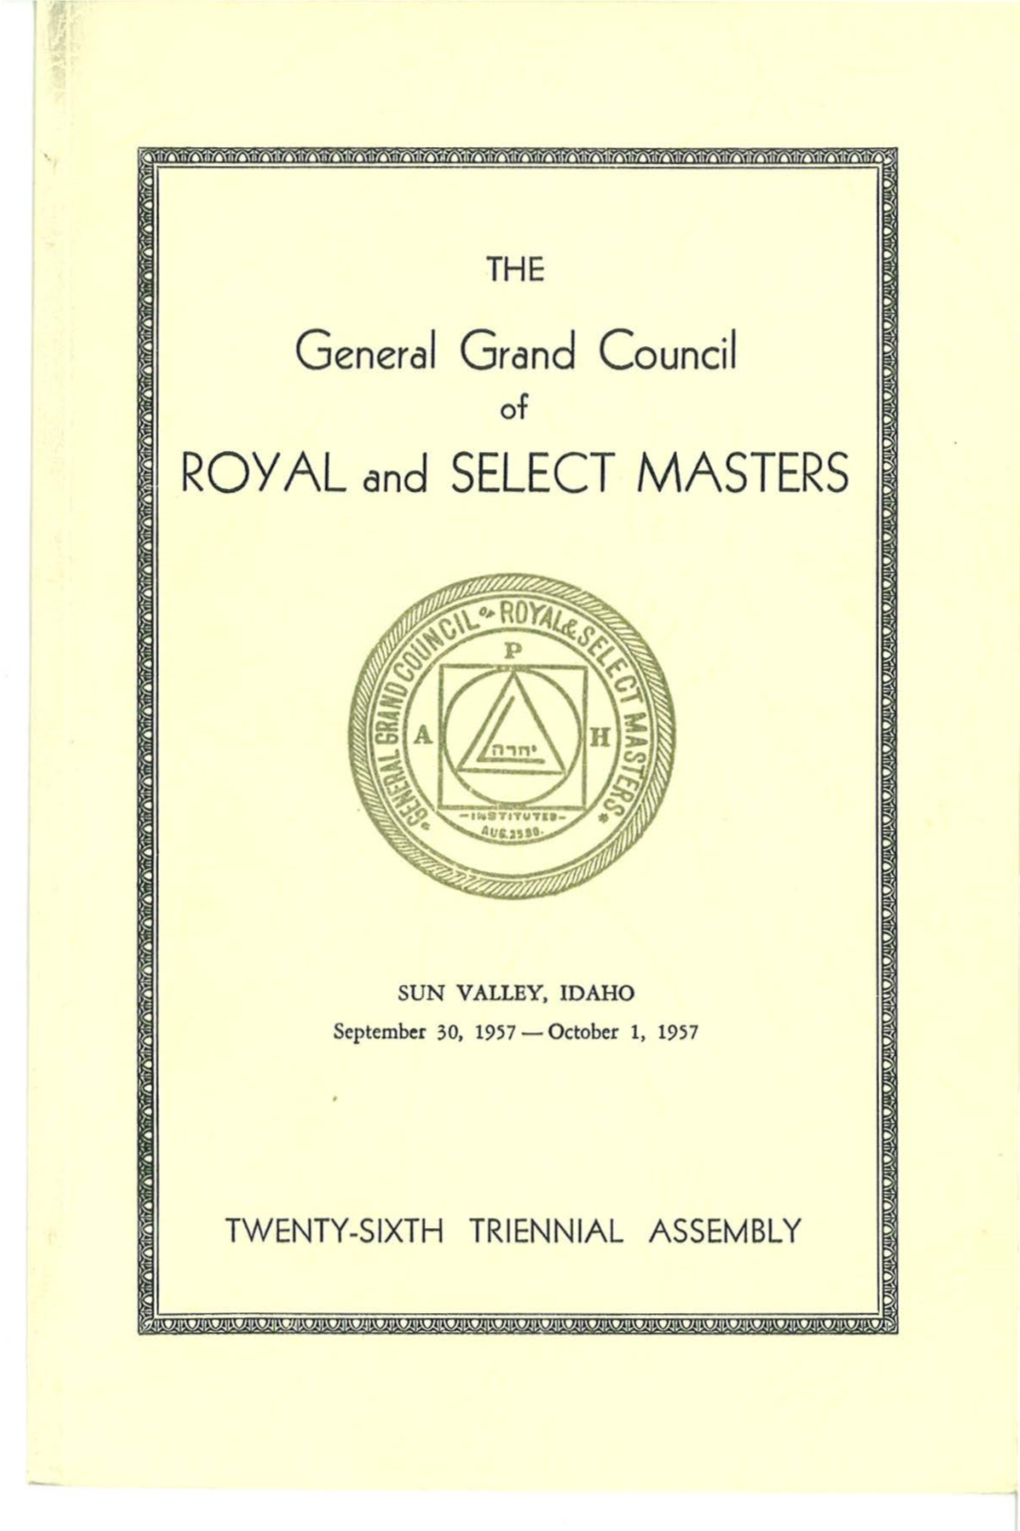 General Grand Council ROY AL and SELECT MASTERS